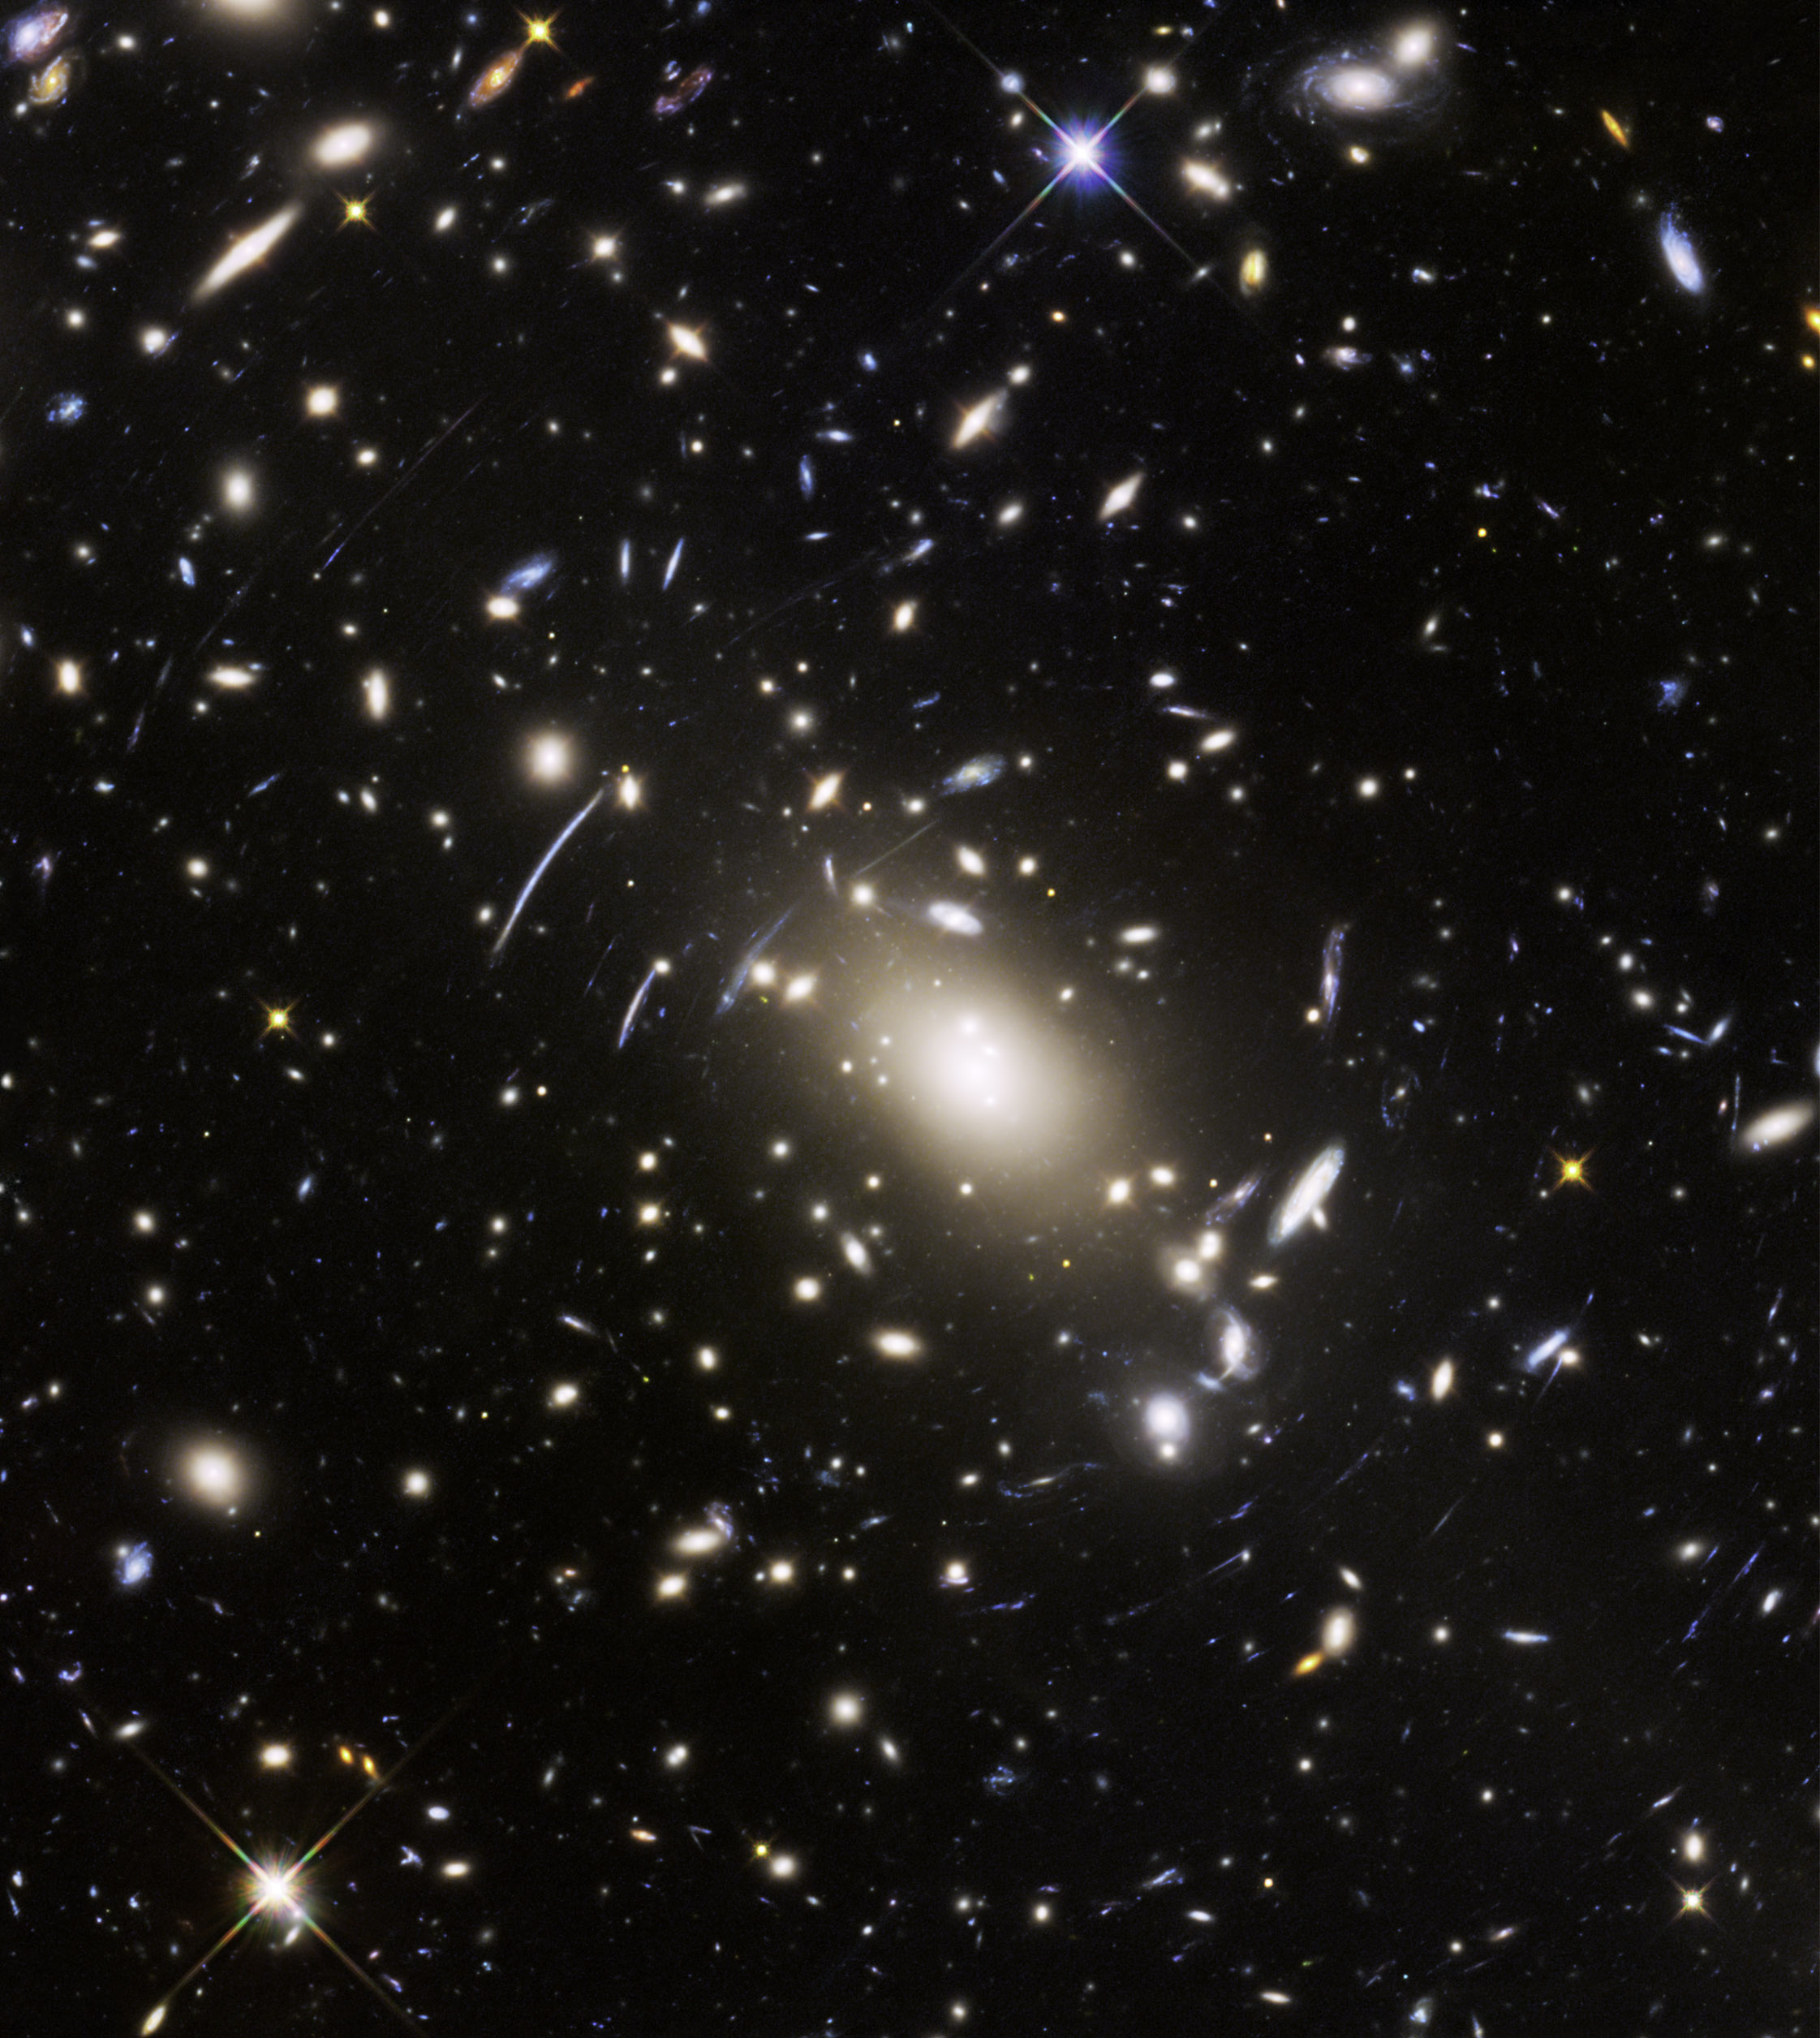 Abell S1063, a galaxy cluster, was observed by the NASA/ESA Hubble Space Telescope as part of the Frontier Fields program. The huge mass of the cluster acts as a cosmic magnifying glass and enlarges even more distant galaxies, so they become bright enough for Hubble to see. (NASA, ESA, and J. Lotz (STScI))